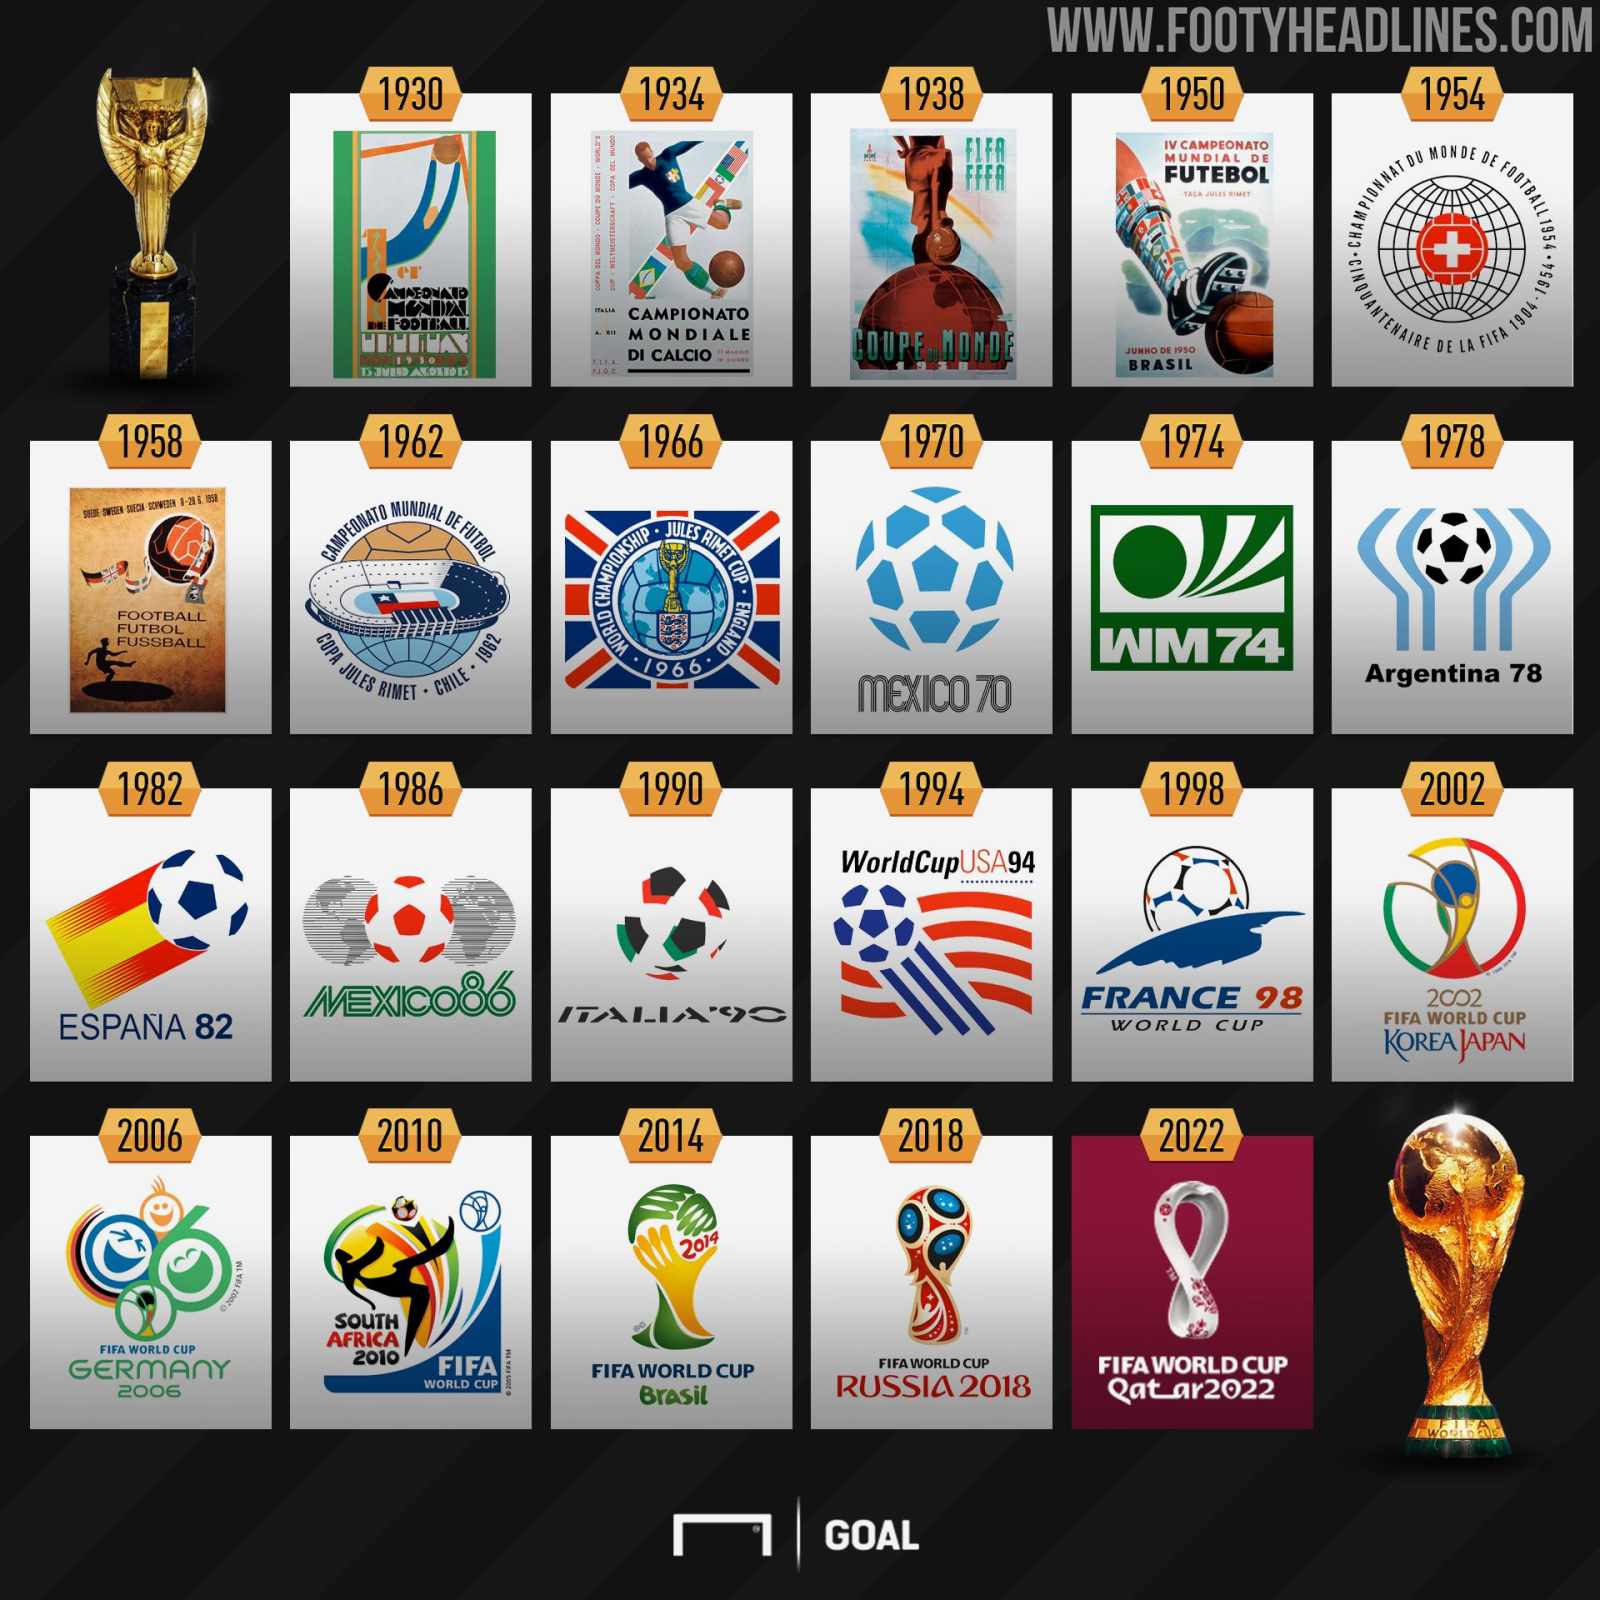 Full FIFA World Cup Logo History From 1930 Until 2022 - Where Does Qatar 2022 Rank?